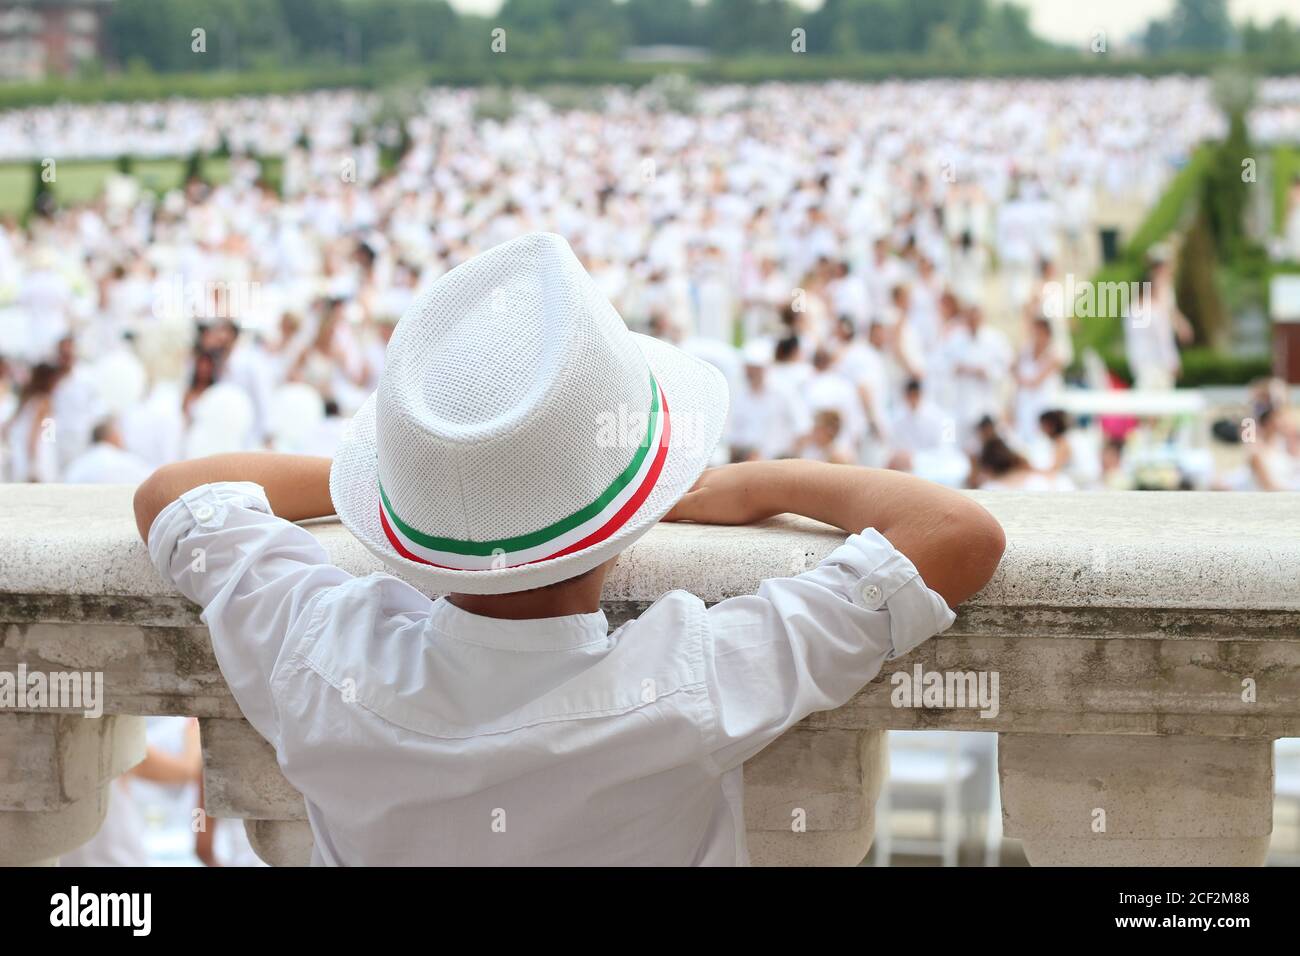 a young boy with white hat and shirt Stock Photo